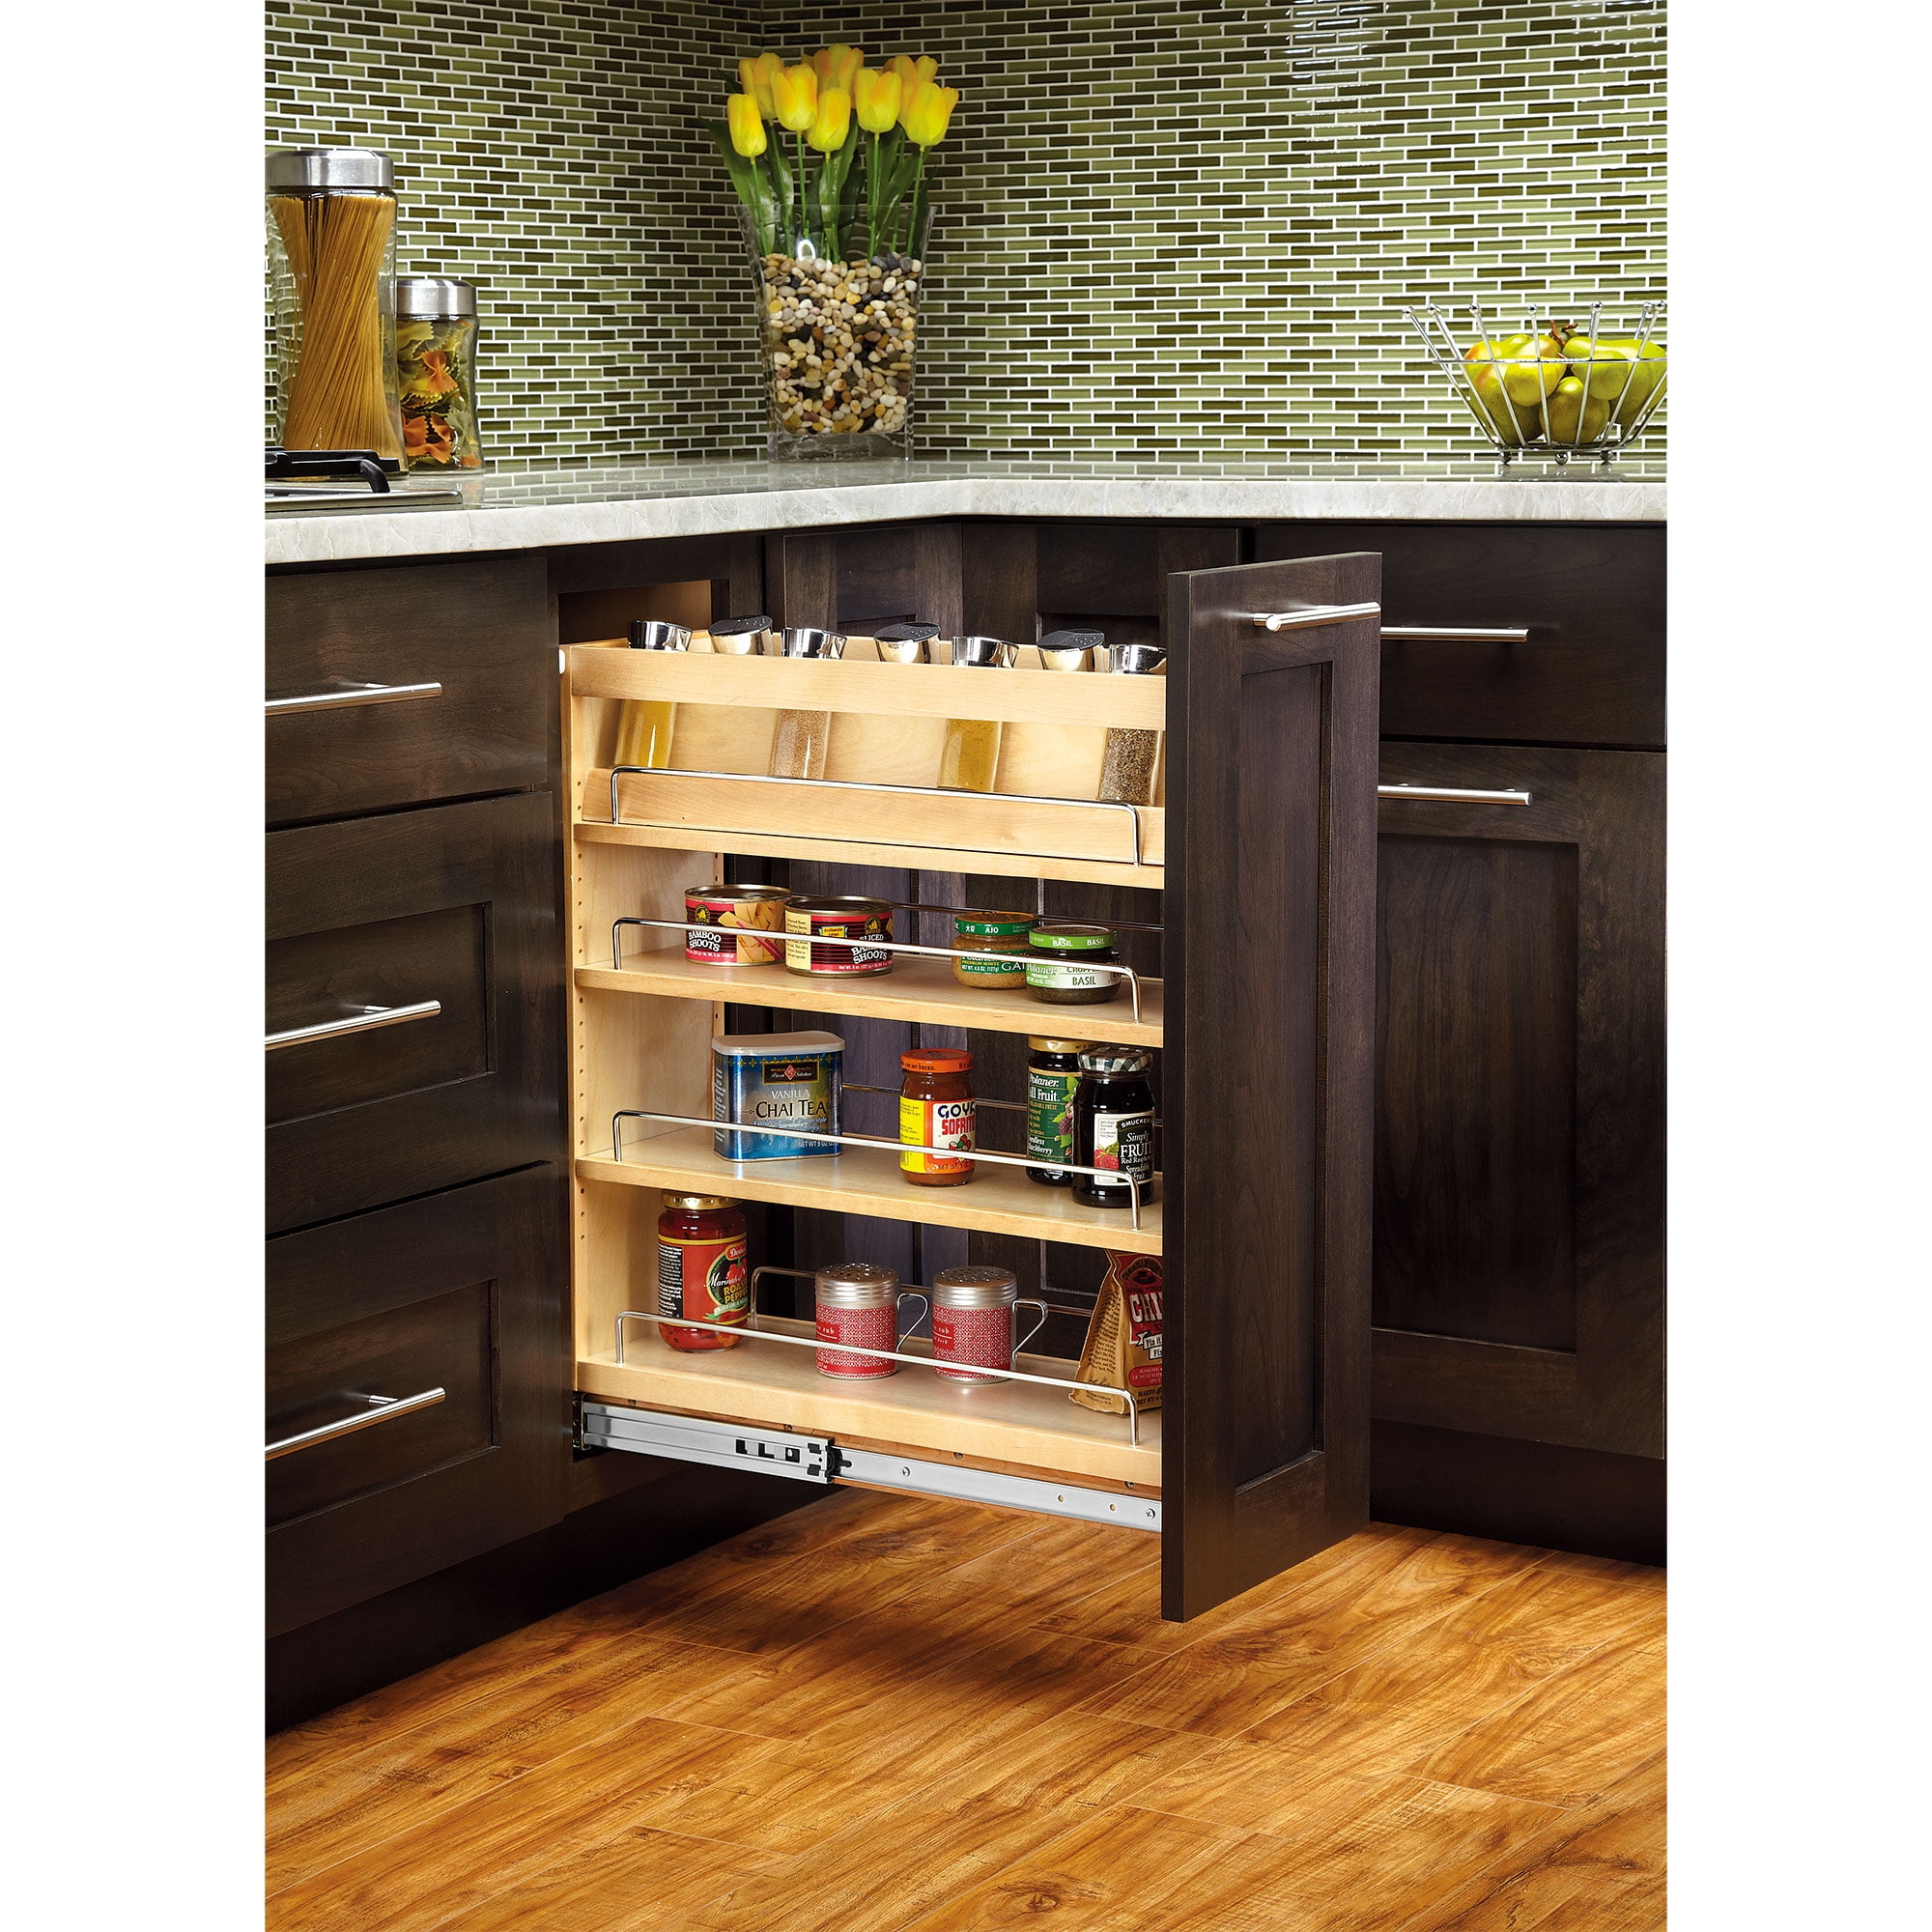 Rev-A-Shelf 8 Pull Out Storage Organizer for Base Kitchen Cabinets,  Sliding Shelves for Utilities, Utensils or Spices with Soft-Close,  448UT-BCSC-8C